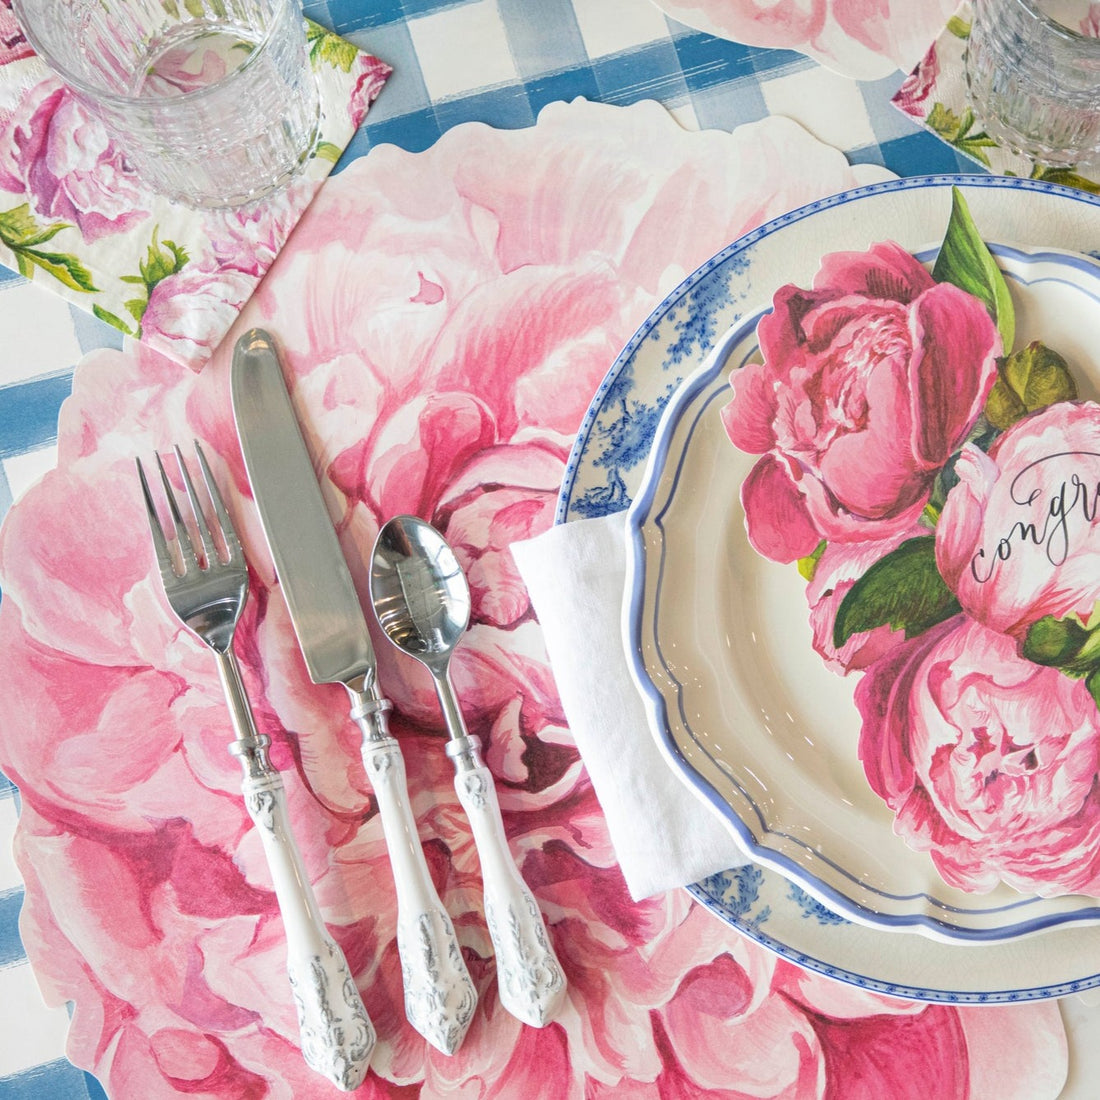 The Die-cut Peony Placemat under an elegant floral place setting.